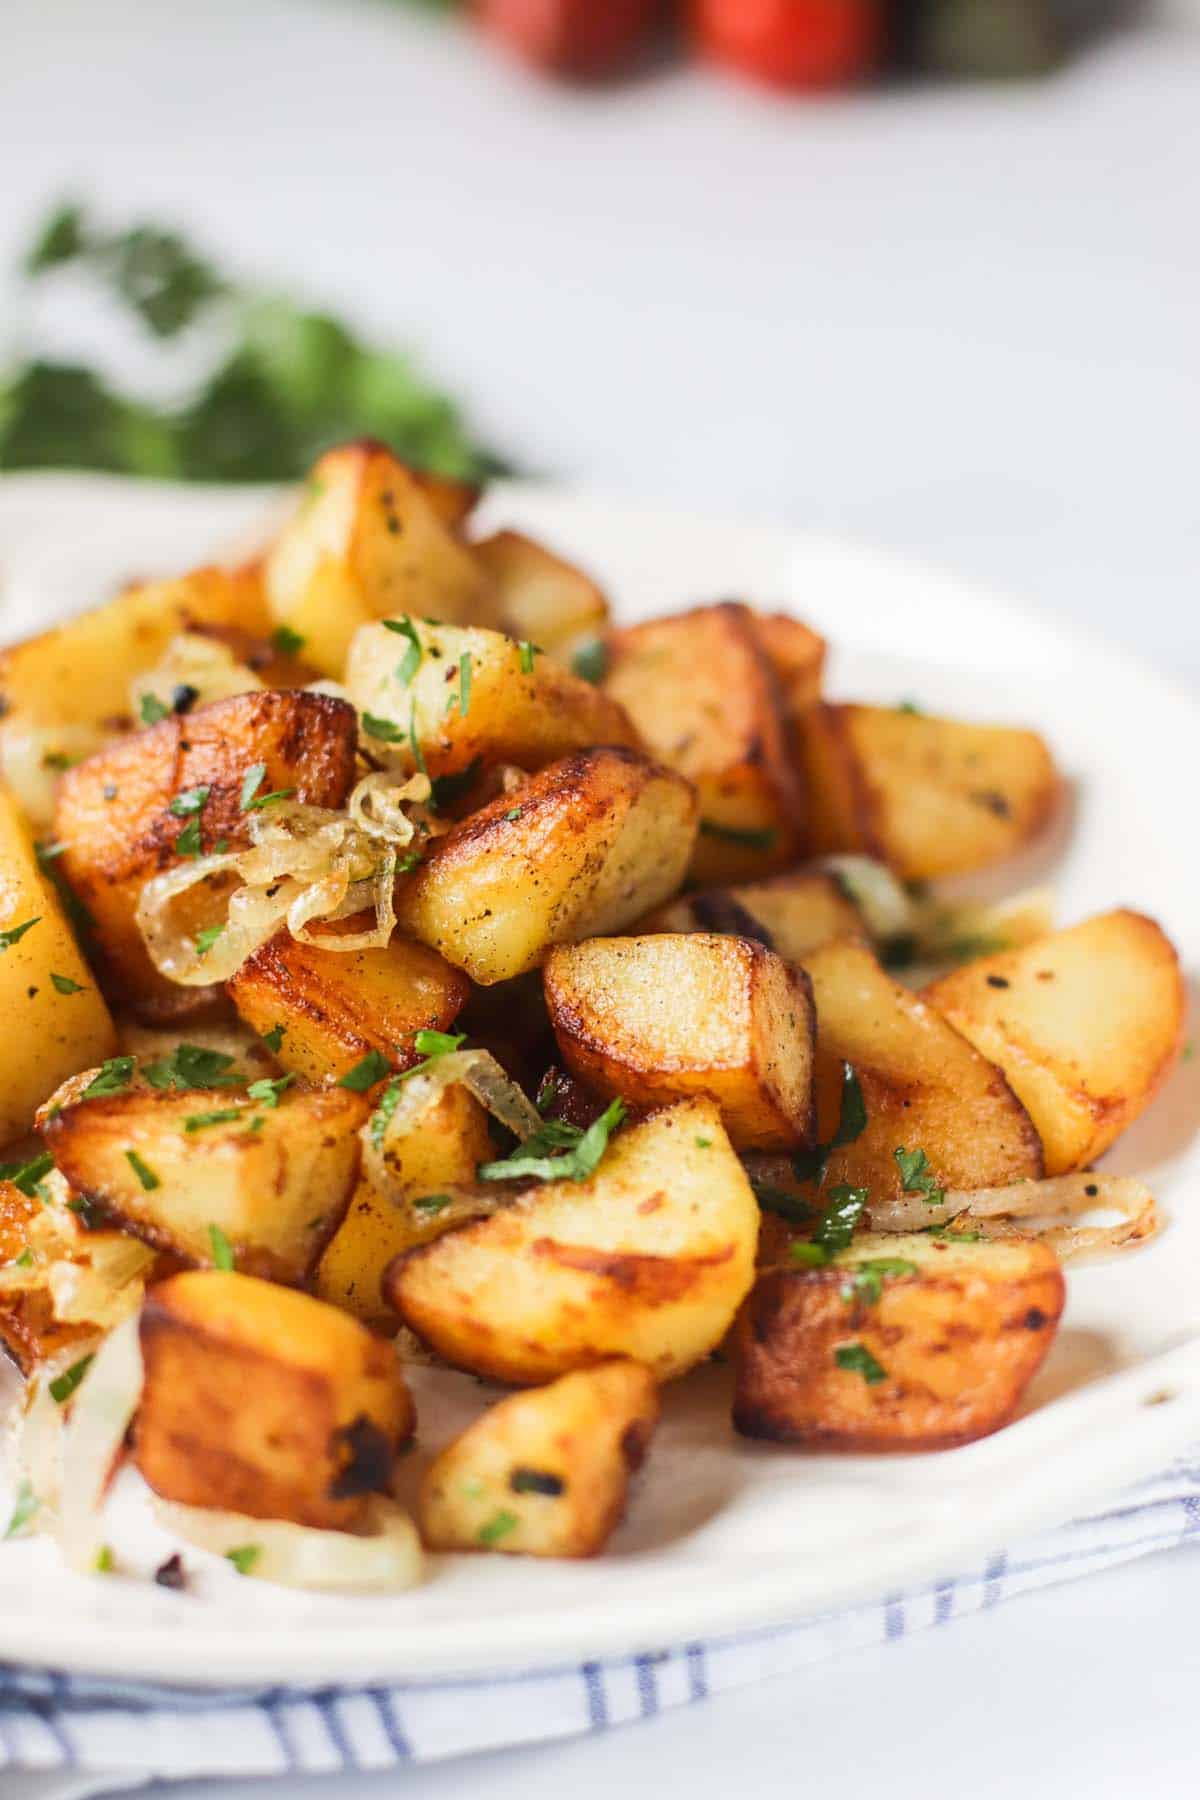 Fried potatoes on a plate topped with onions and parsley.